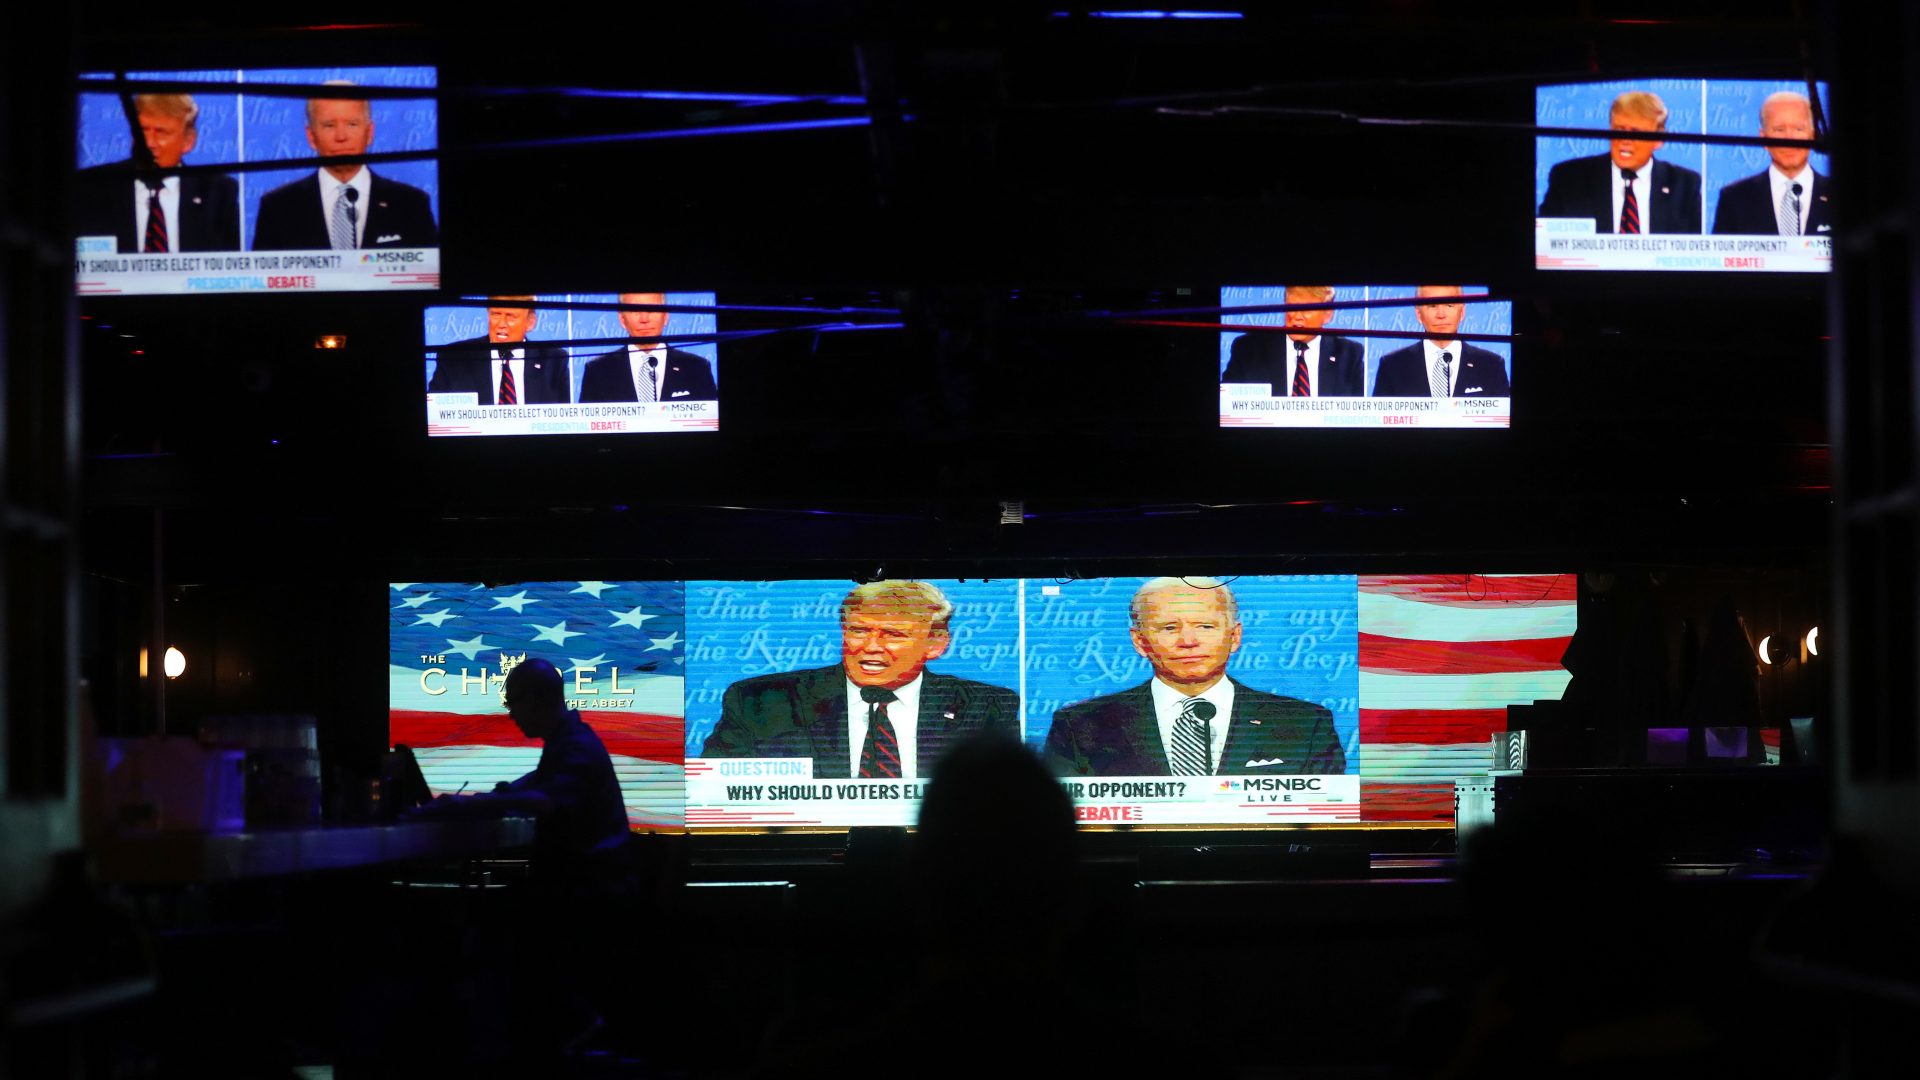 WEST HOLLYWOOD, CALIFORNIA - SEPTEMBER 29: A broadcast of the first debate between President Donald Trump and Democratic presidential nominee Joe Biden is played on indoor TV's at The Abbey, which seated patrons at socially distanced outdoor tables, on September 29, 2020 in West Hollywood, California. The debate being held in Cleveland, Ohio is the first of three scheduled debates between Trump and Biden. (Photo by Mario Tama/Getty Images)